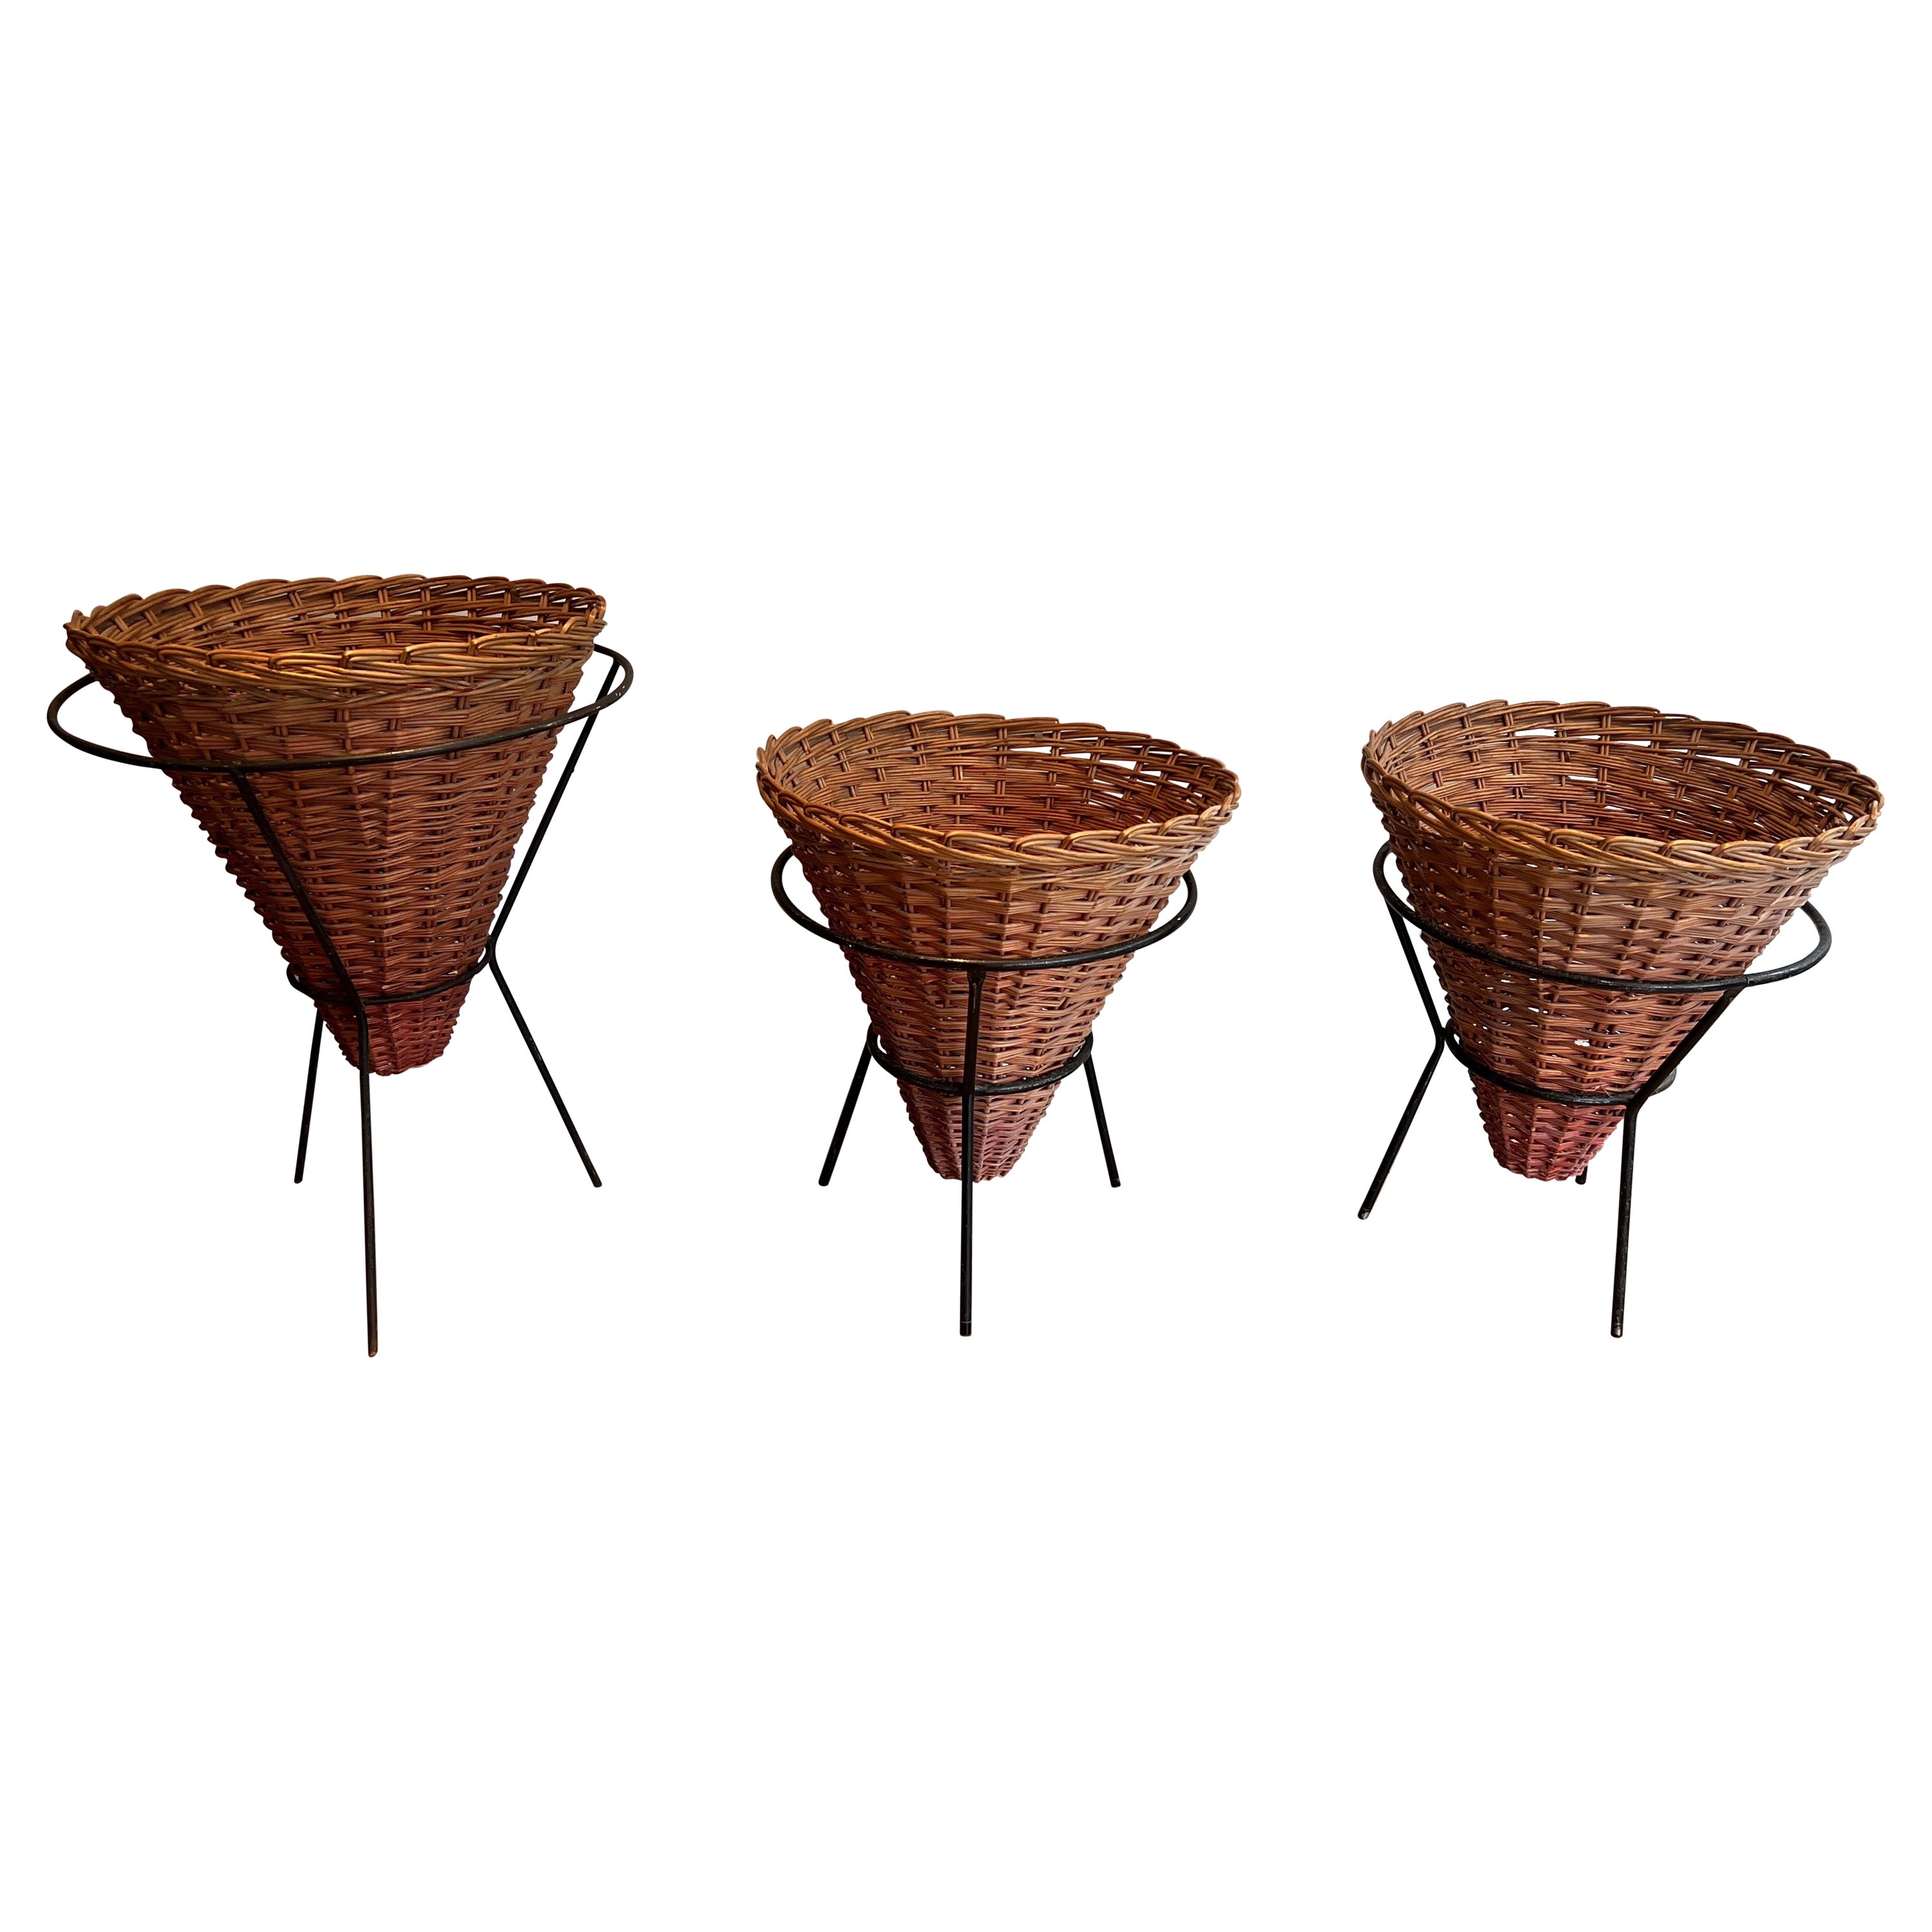 Set of Three Black Lacquered Metal and Rattan Planters, French Work, circa 1950 For Sale